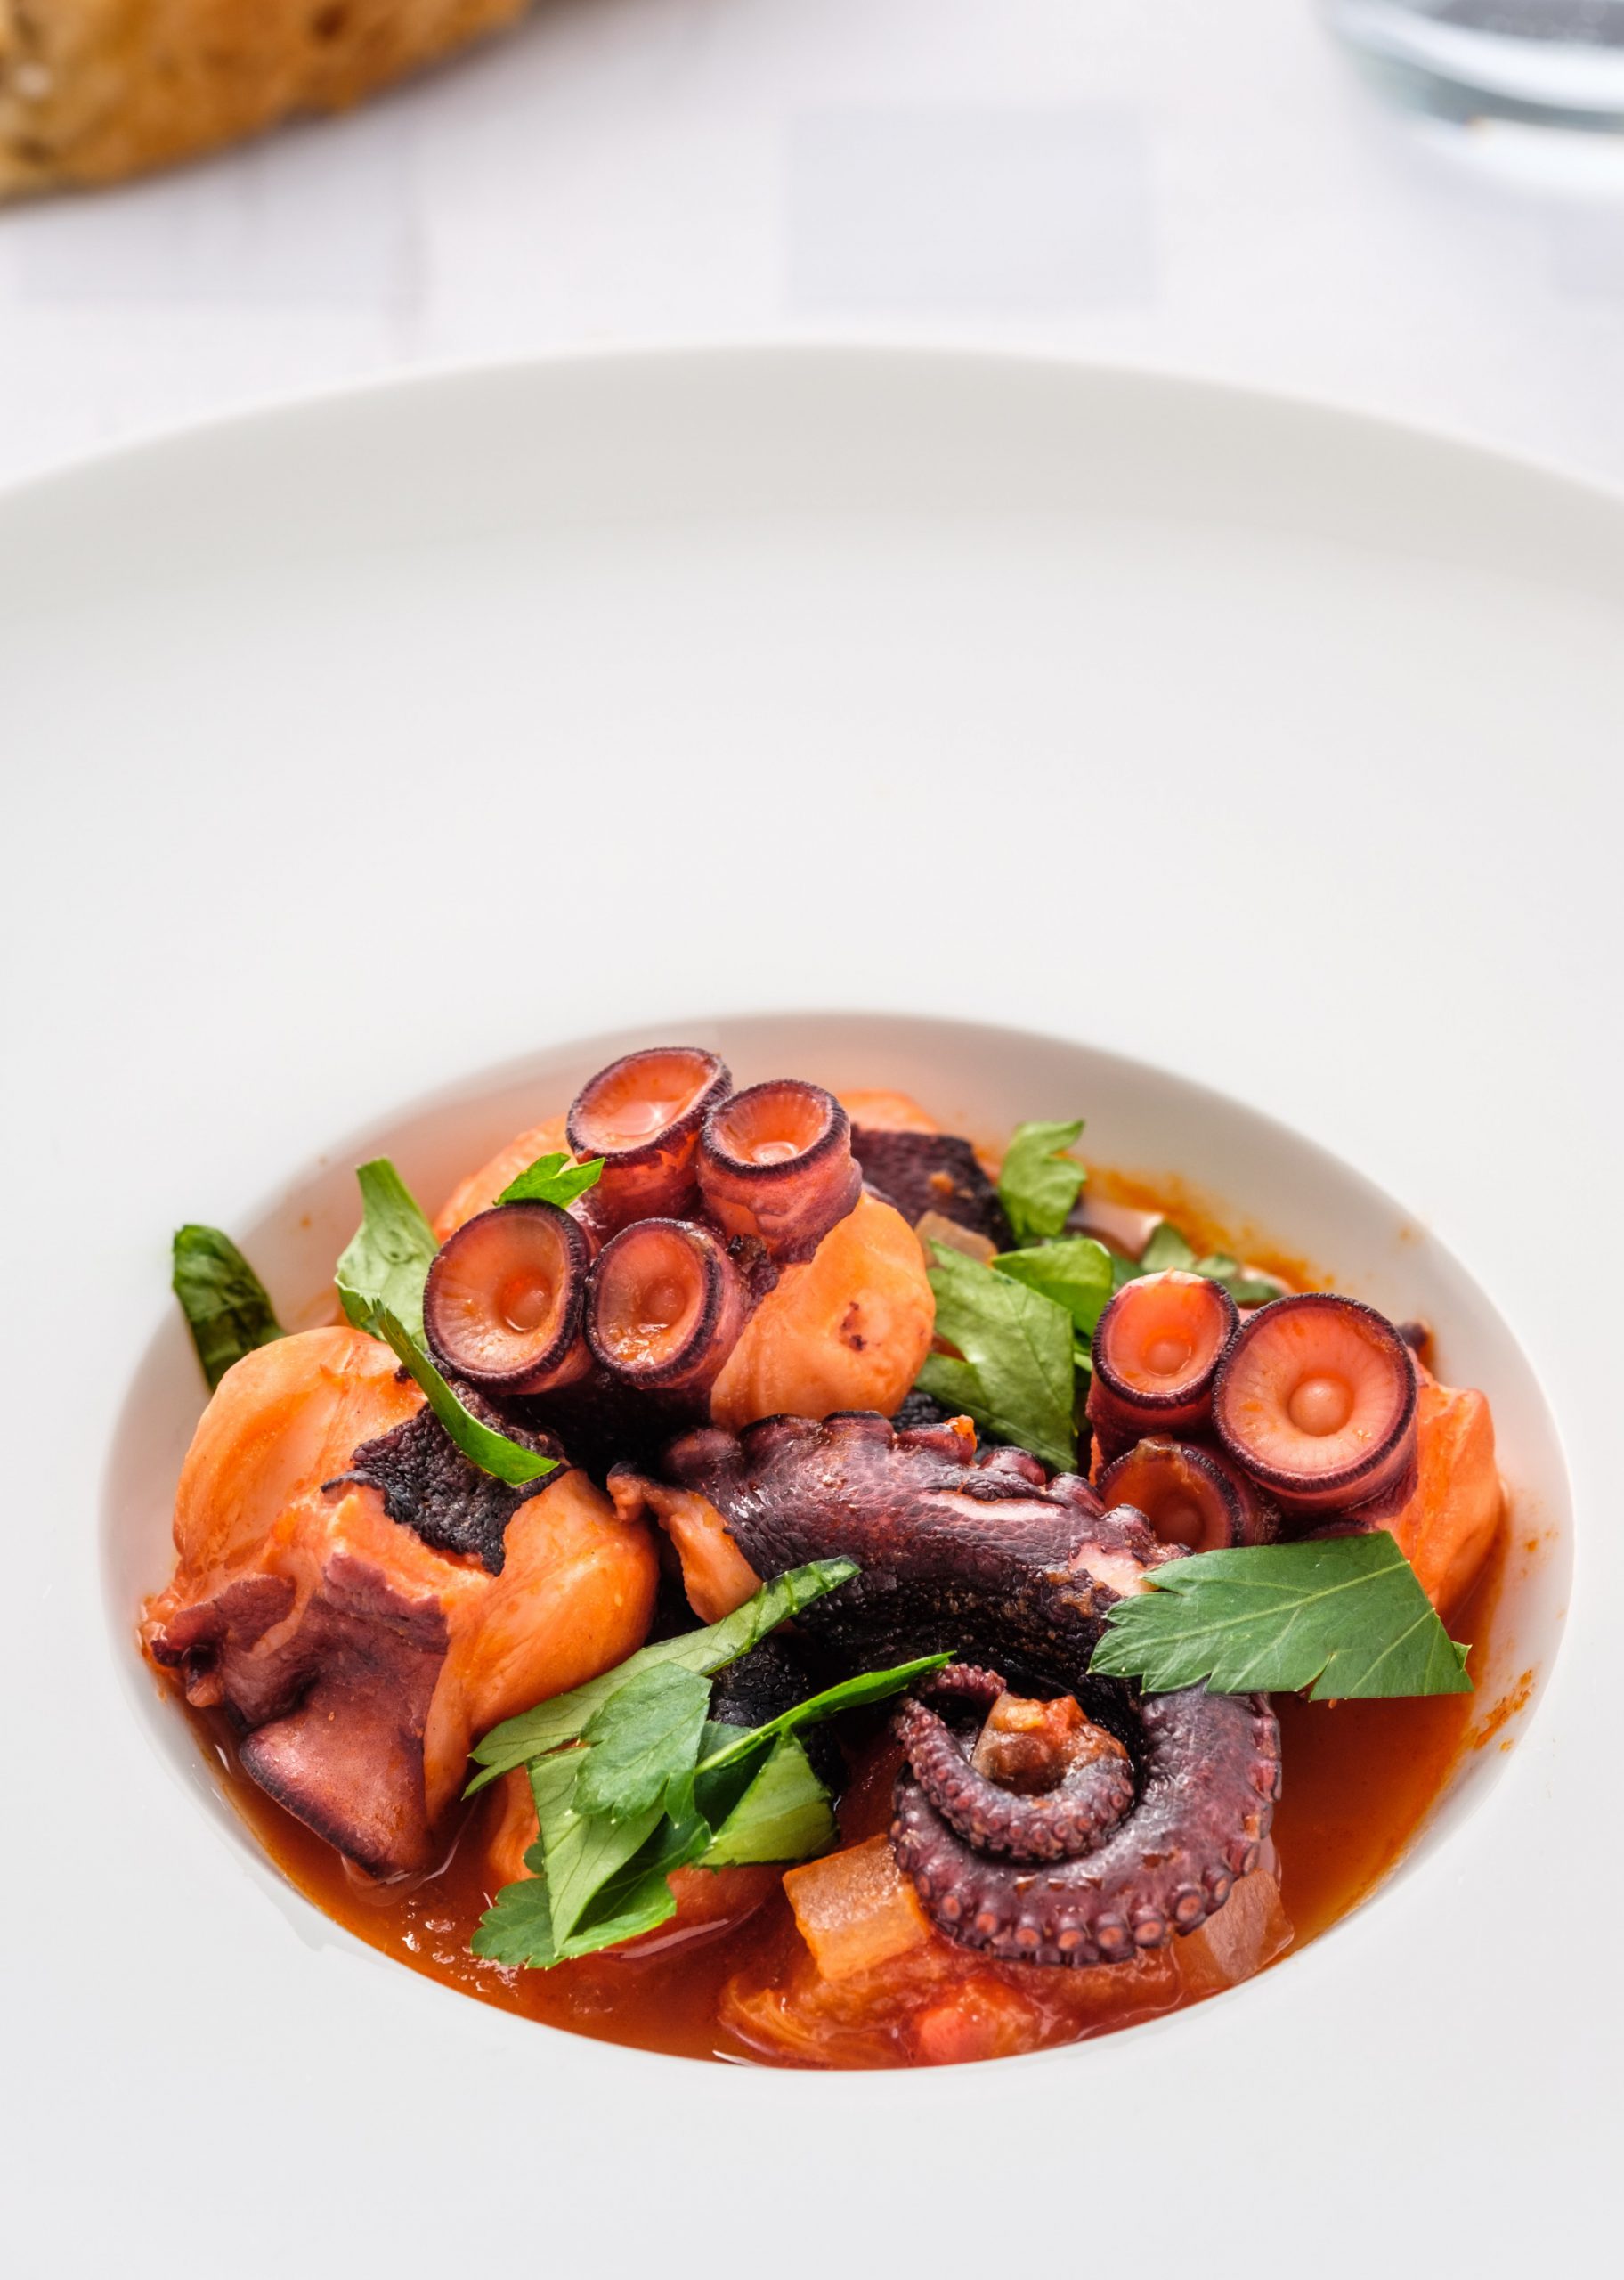 Octopus Stew Recipe, Health Benefits, Nutritional Value and More